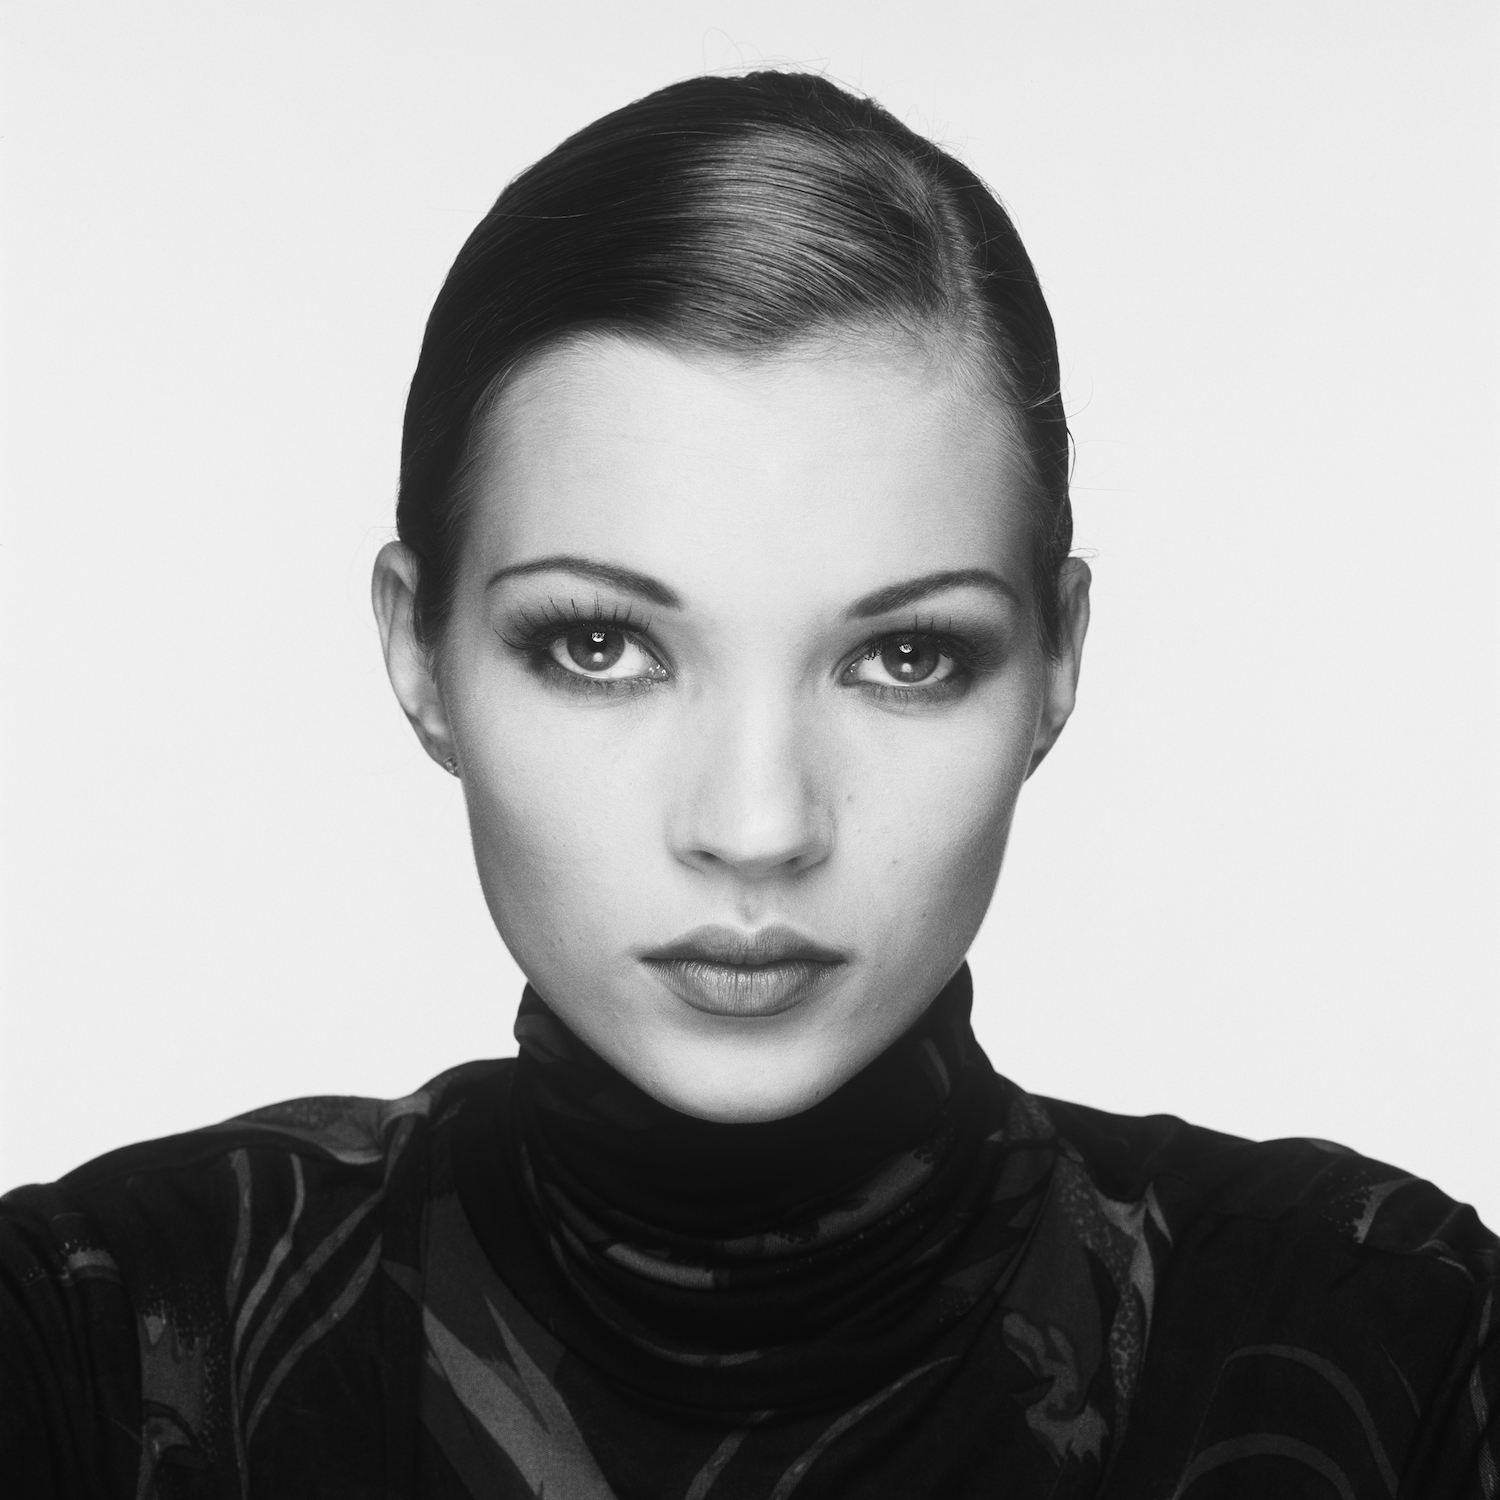 terry_oneill_-_kate_moss_1995_-_courtesy_eduard_planting_gallery